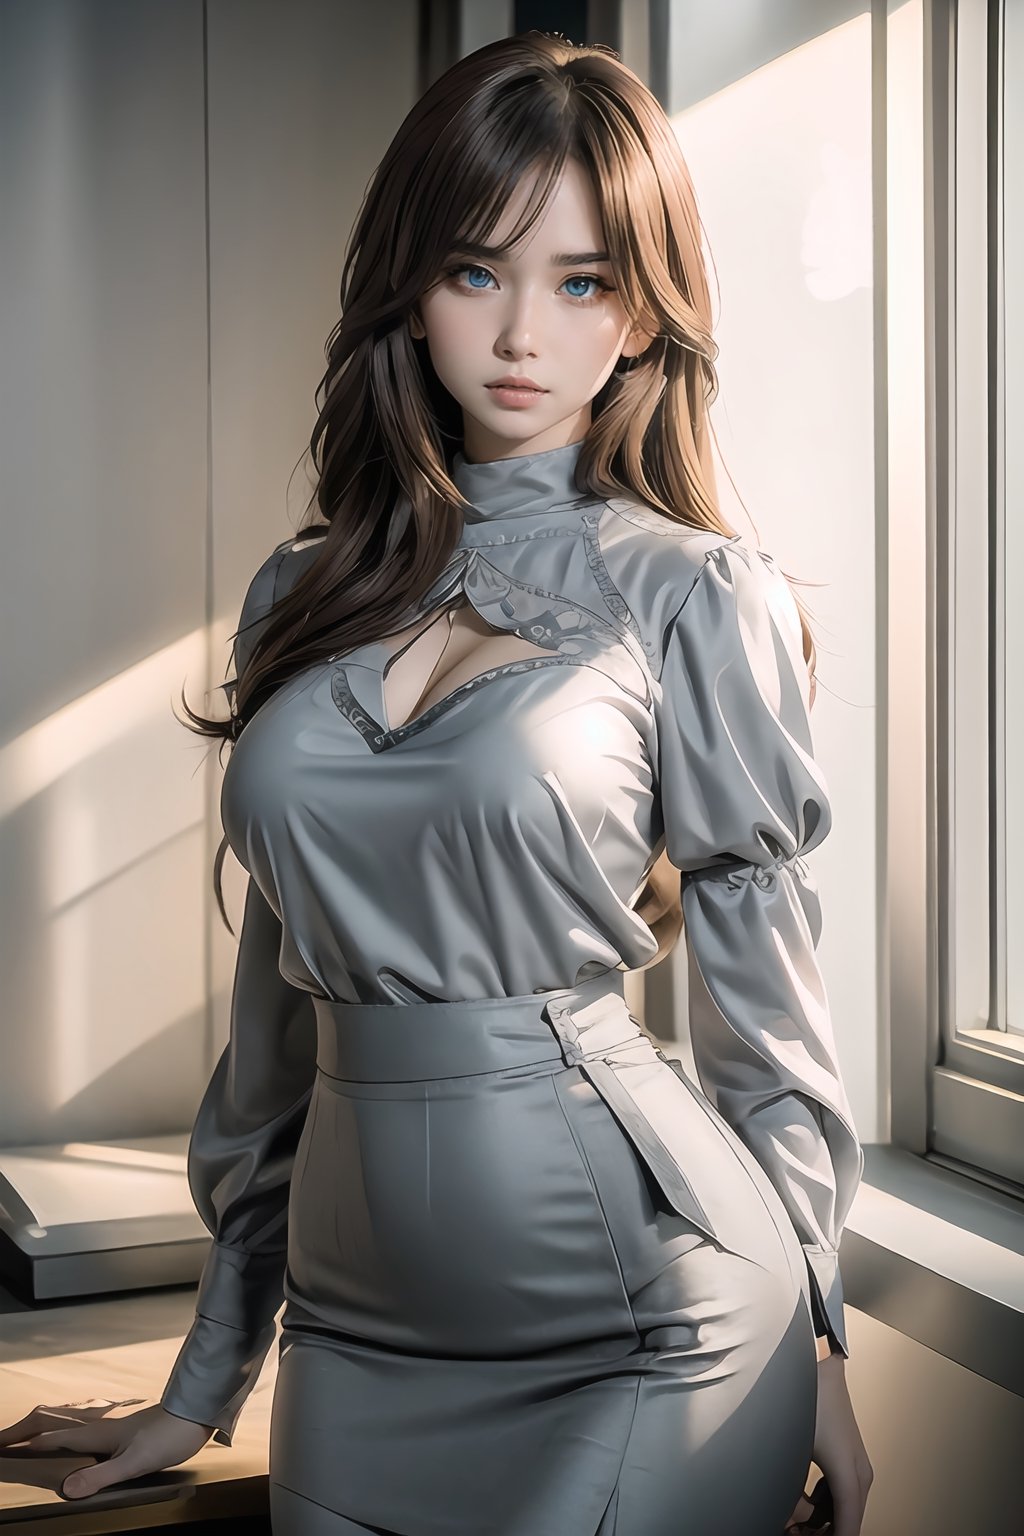 (UHQ, 8k, high resolution, adult anime), 1 girl, 26 years old, (((((very ANGRY))))), angry face, housewife, Curvy MILF body, seductive, Passionate, Elegant, long flowing Hairstyle with bangs that fall on her forehead, Dark Brown hair color, green eyes, wearing a simple sexy ((((white blouse and light gray pencil skirt)))), full detail,Timeless beauty,SAM YANG,Wonder of Art and Beauty,Sugar babe 